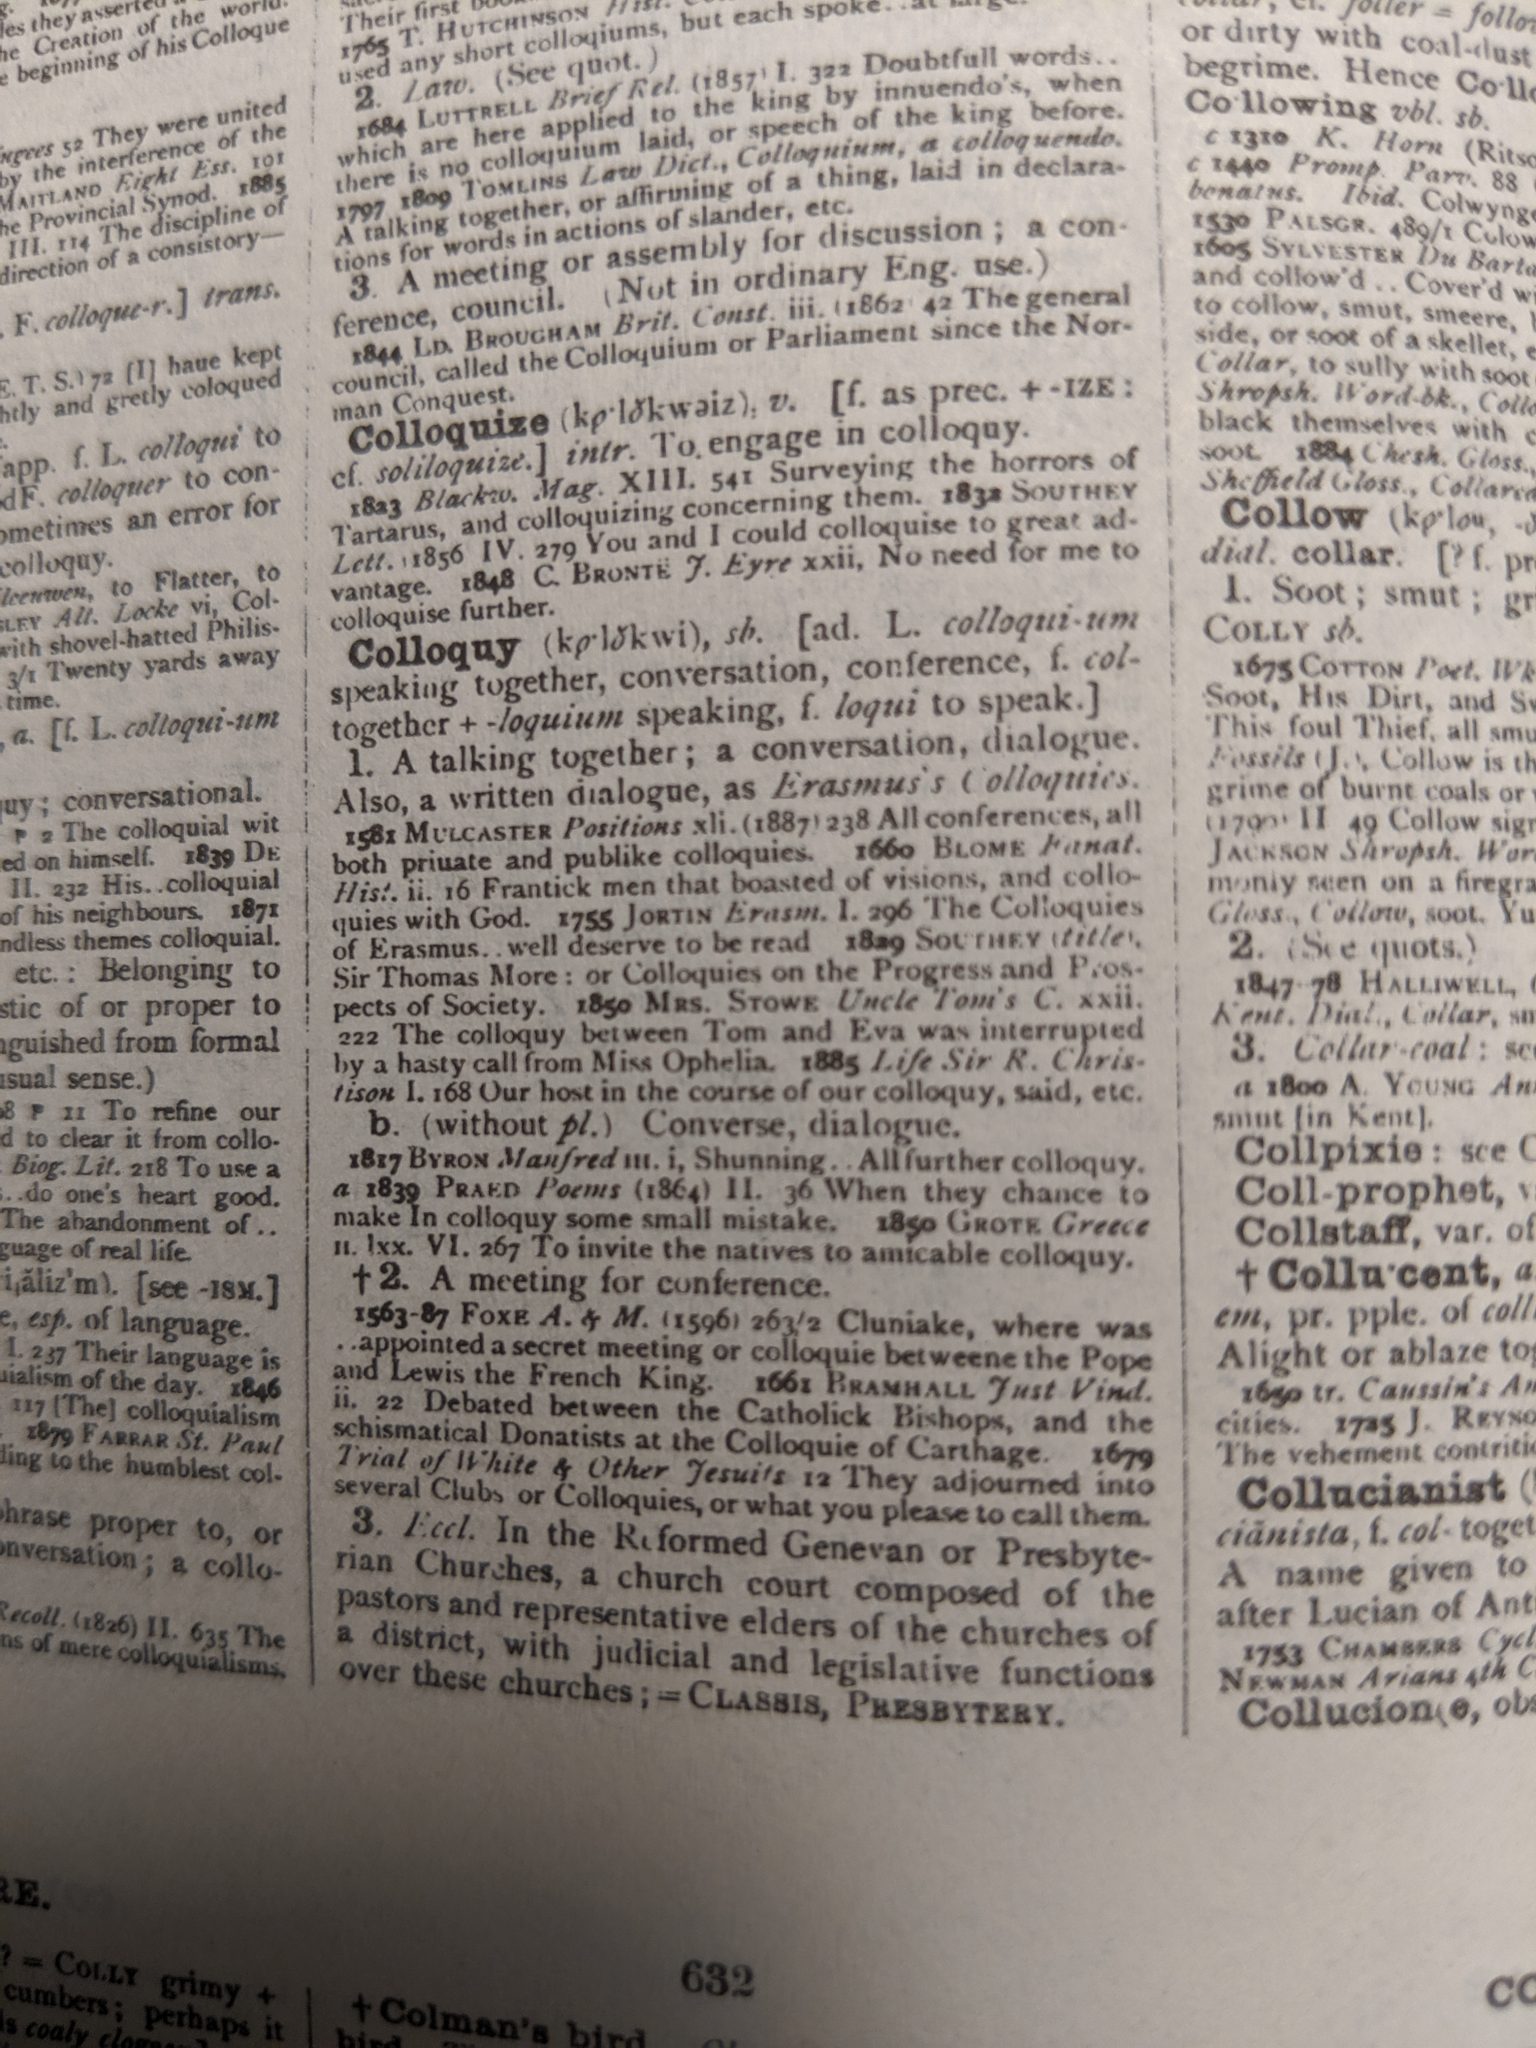 Definition of colloquy in the OED